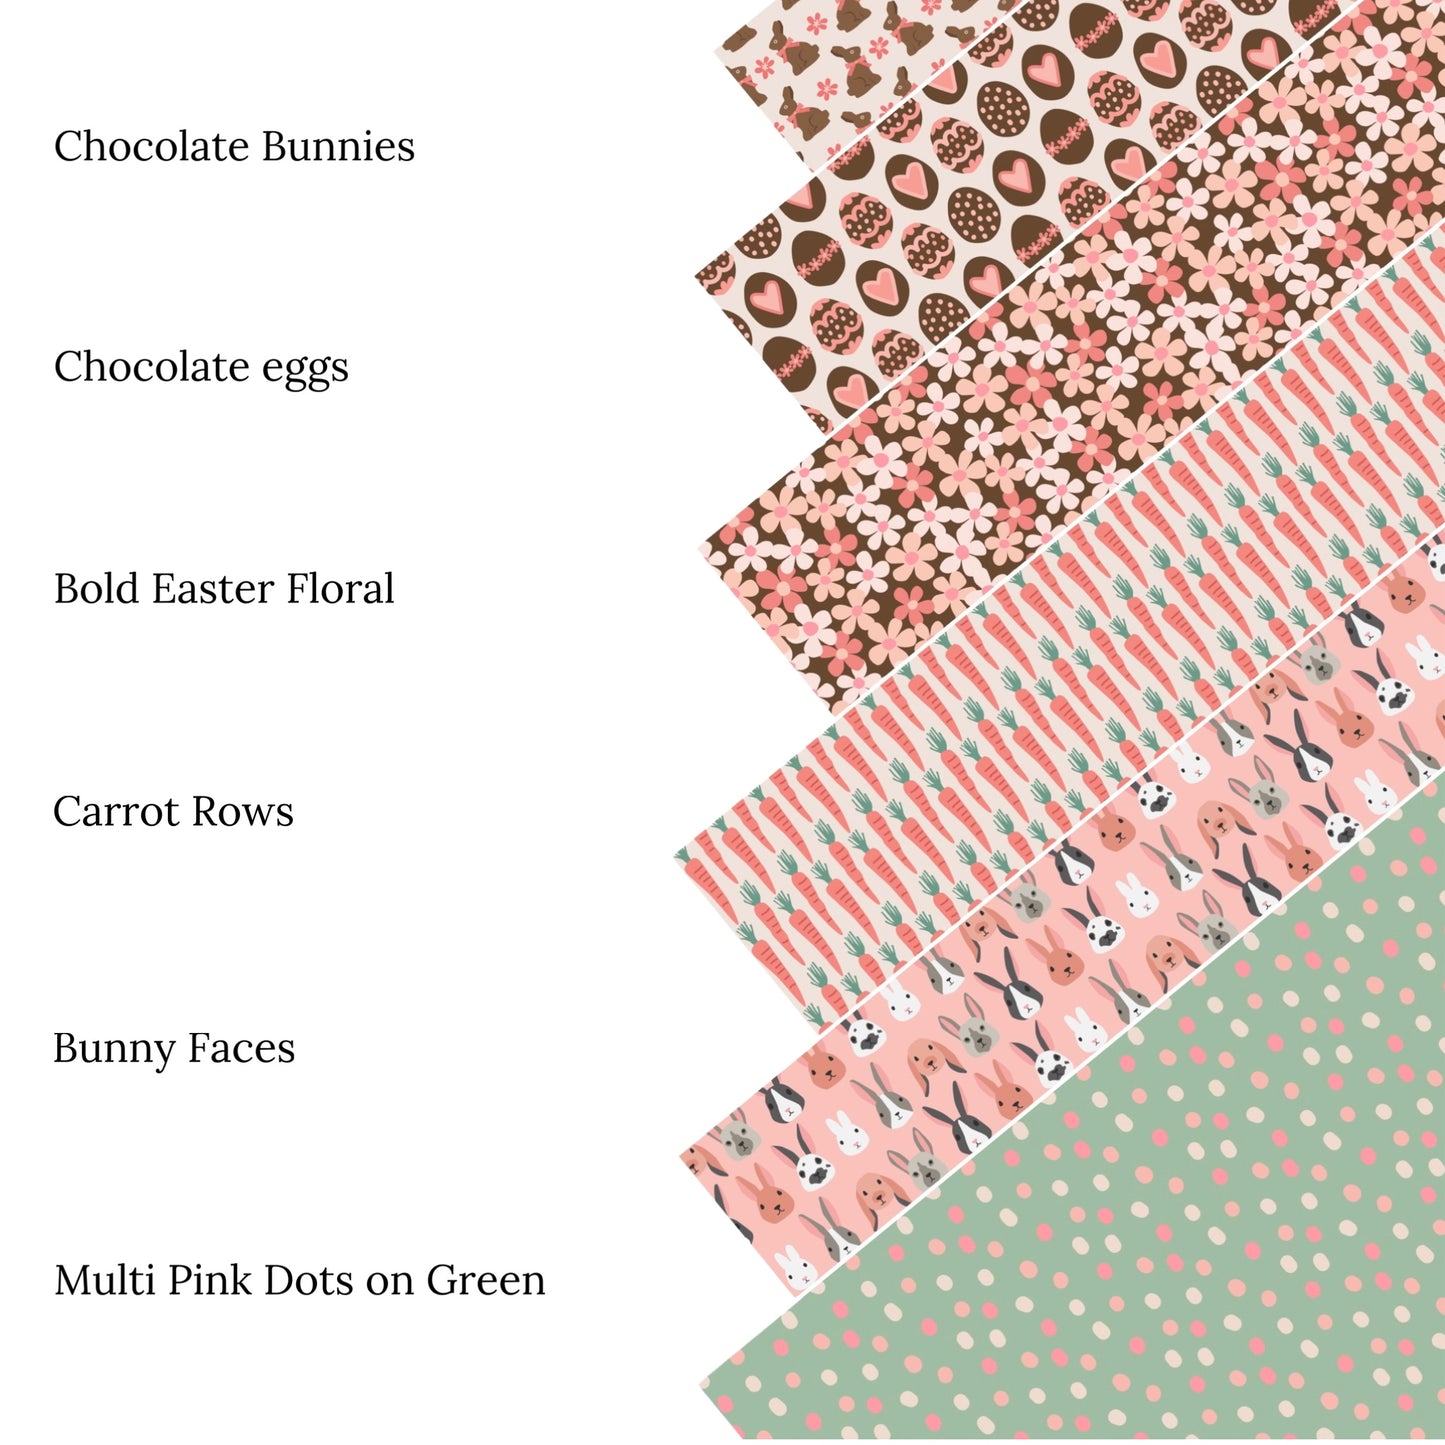 Chocolate Bunnies Faux Leather Sheet